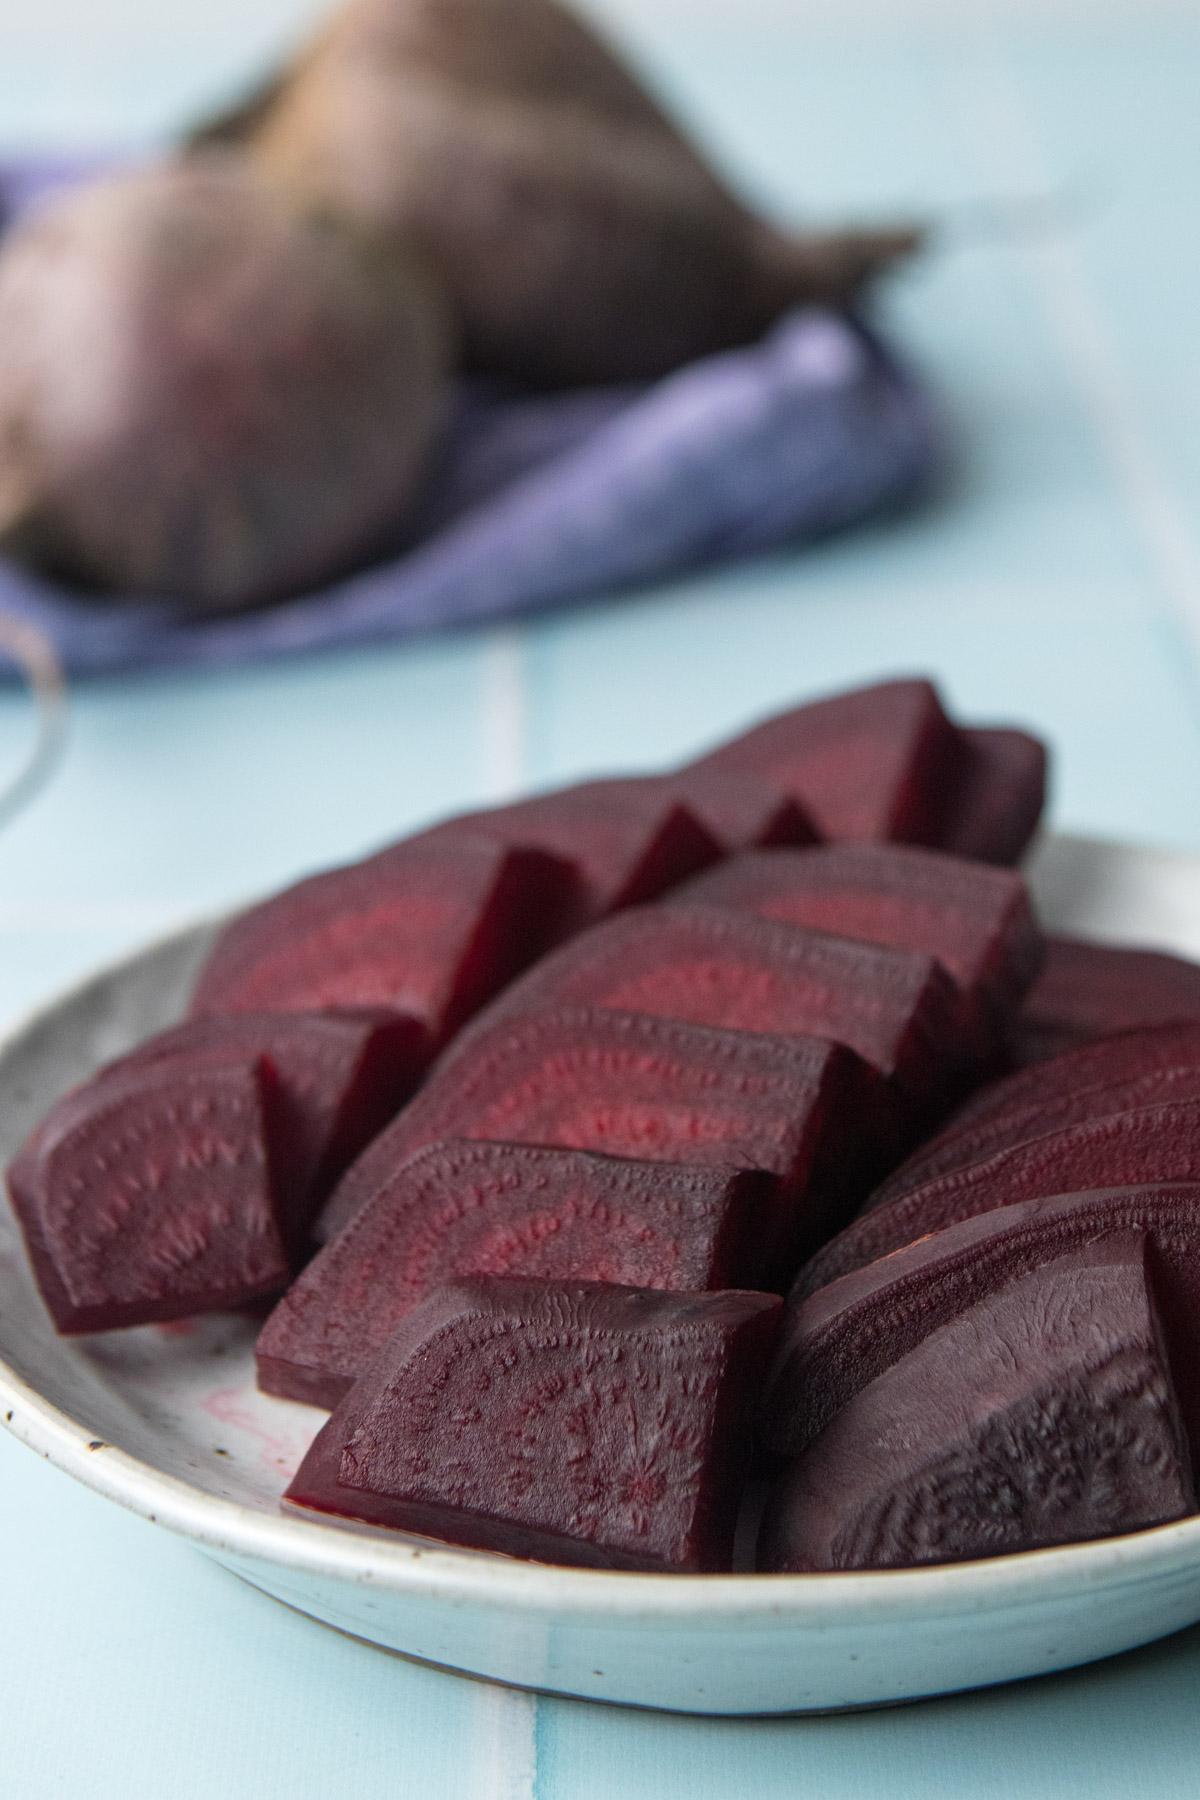 Instant Pot beets on a plate